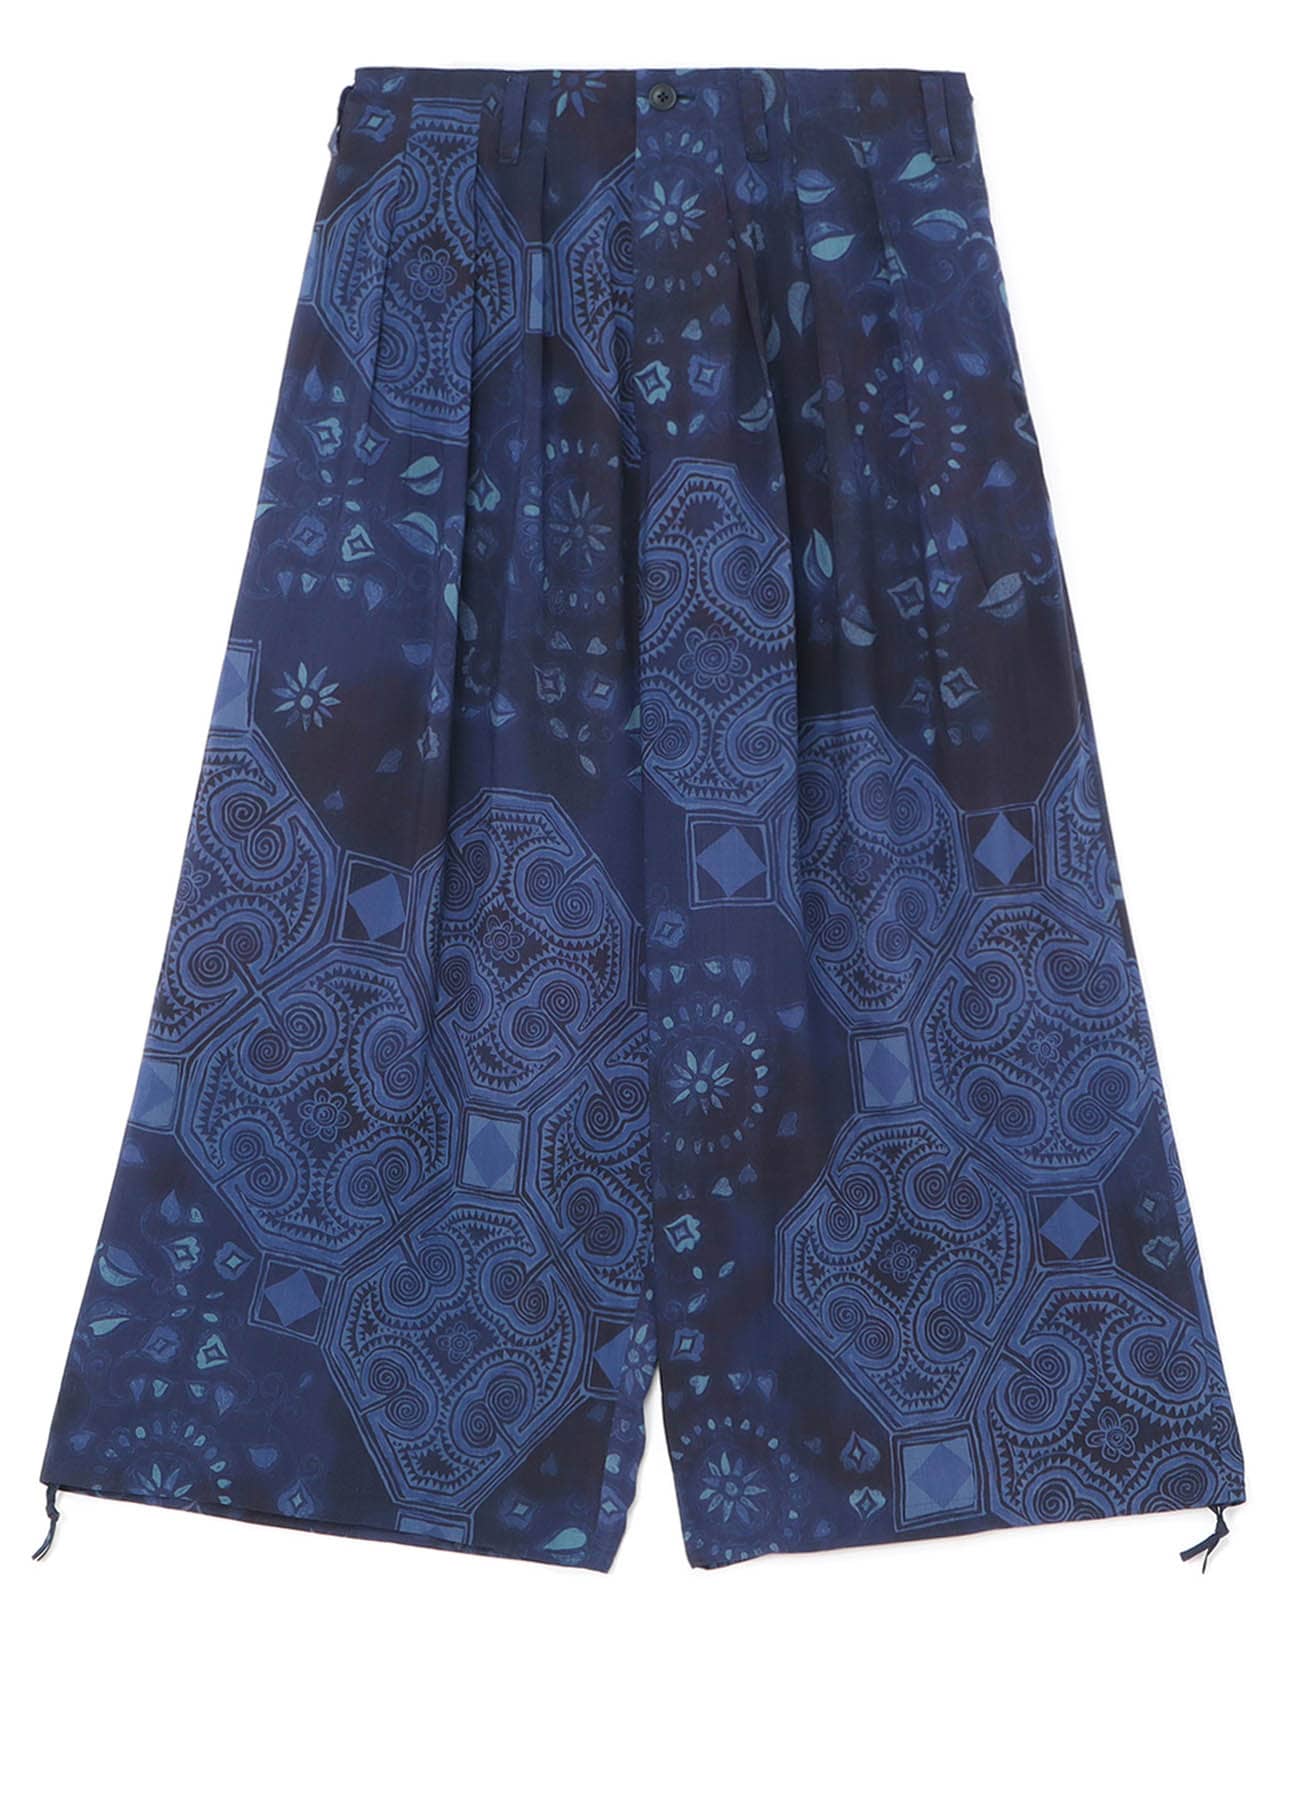 CHINOISERIE-A PRINTED DRAWSTRING BALLOON PANTS(S Blue): Vintage 